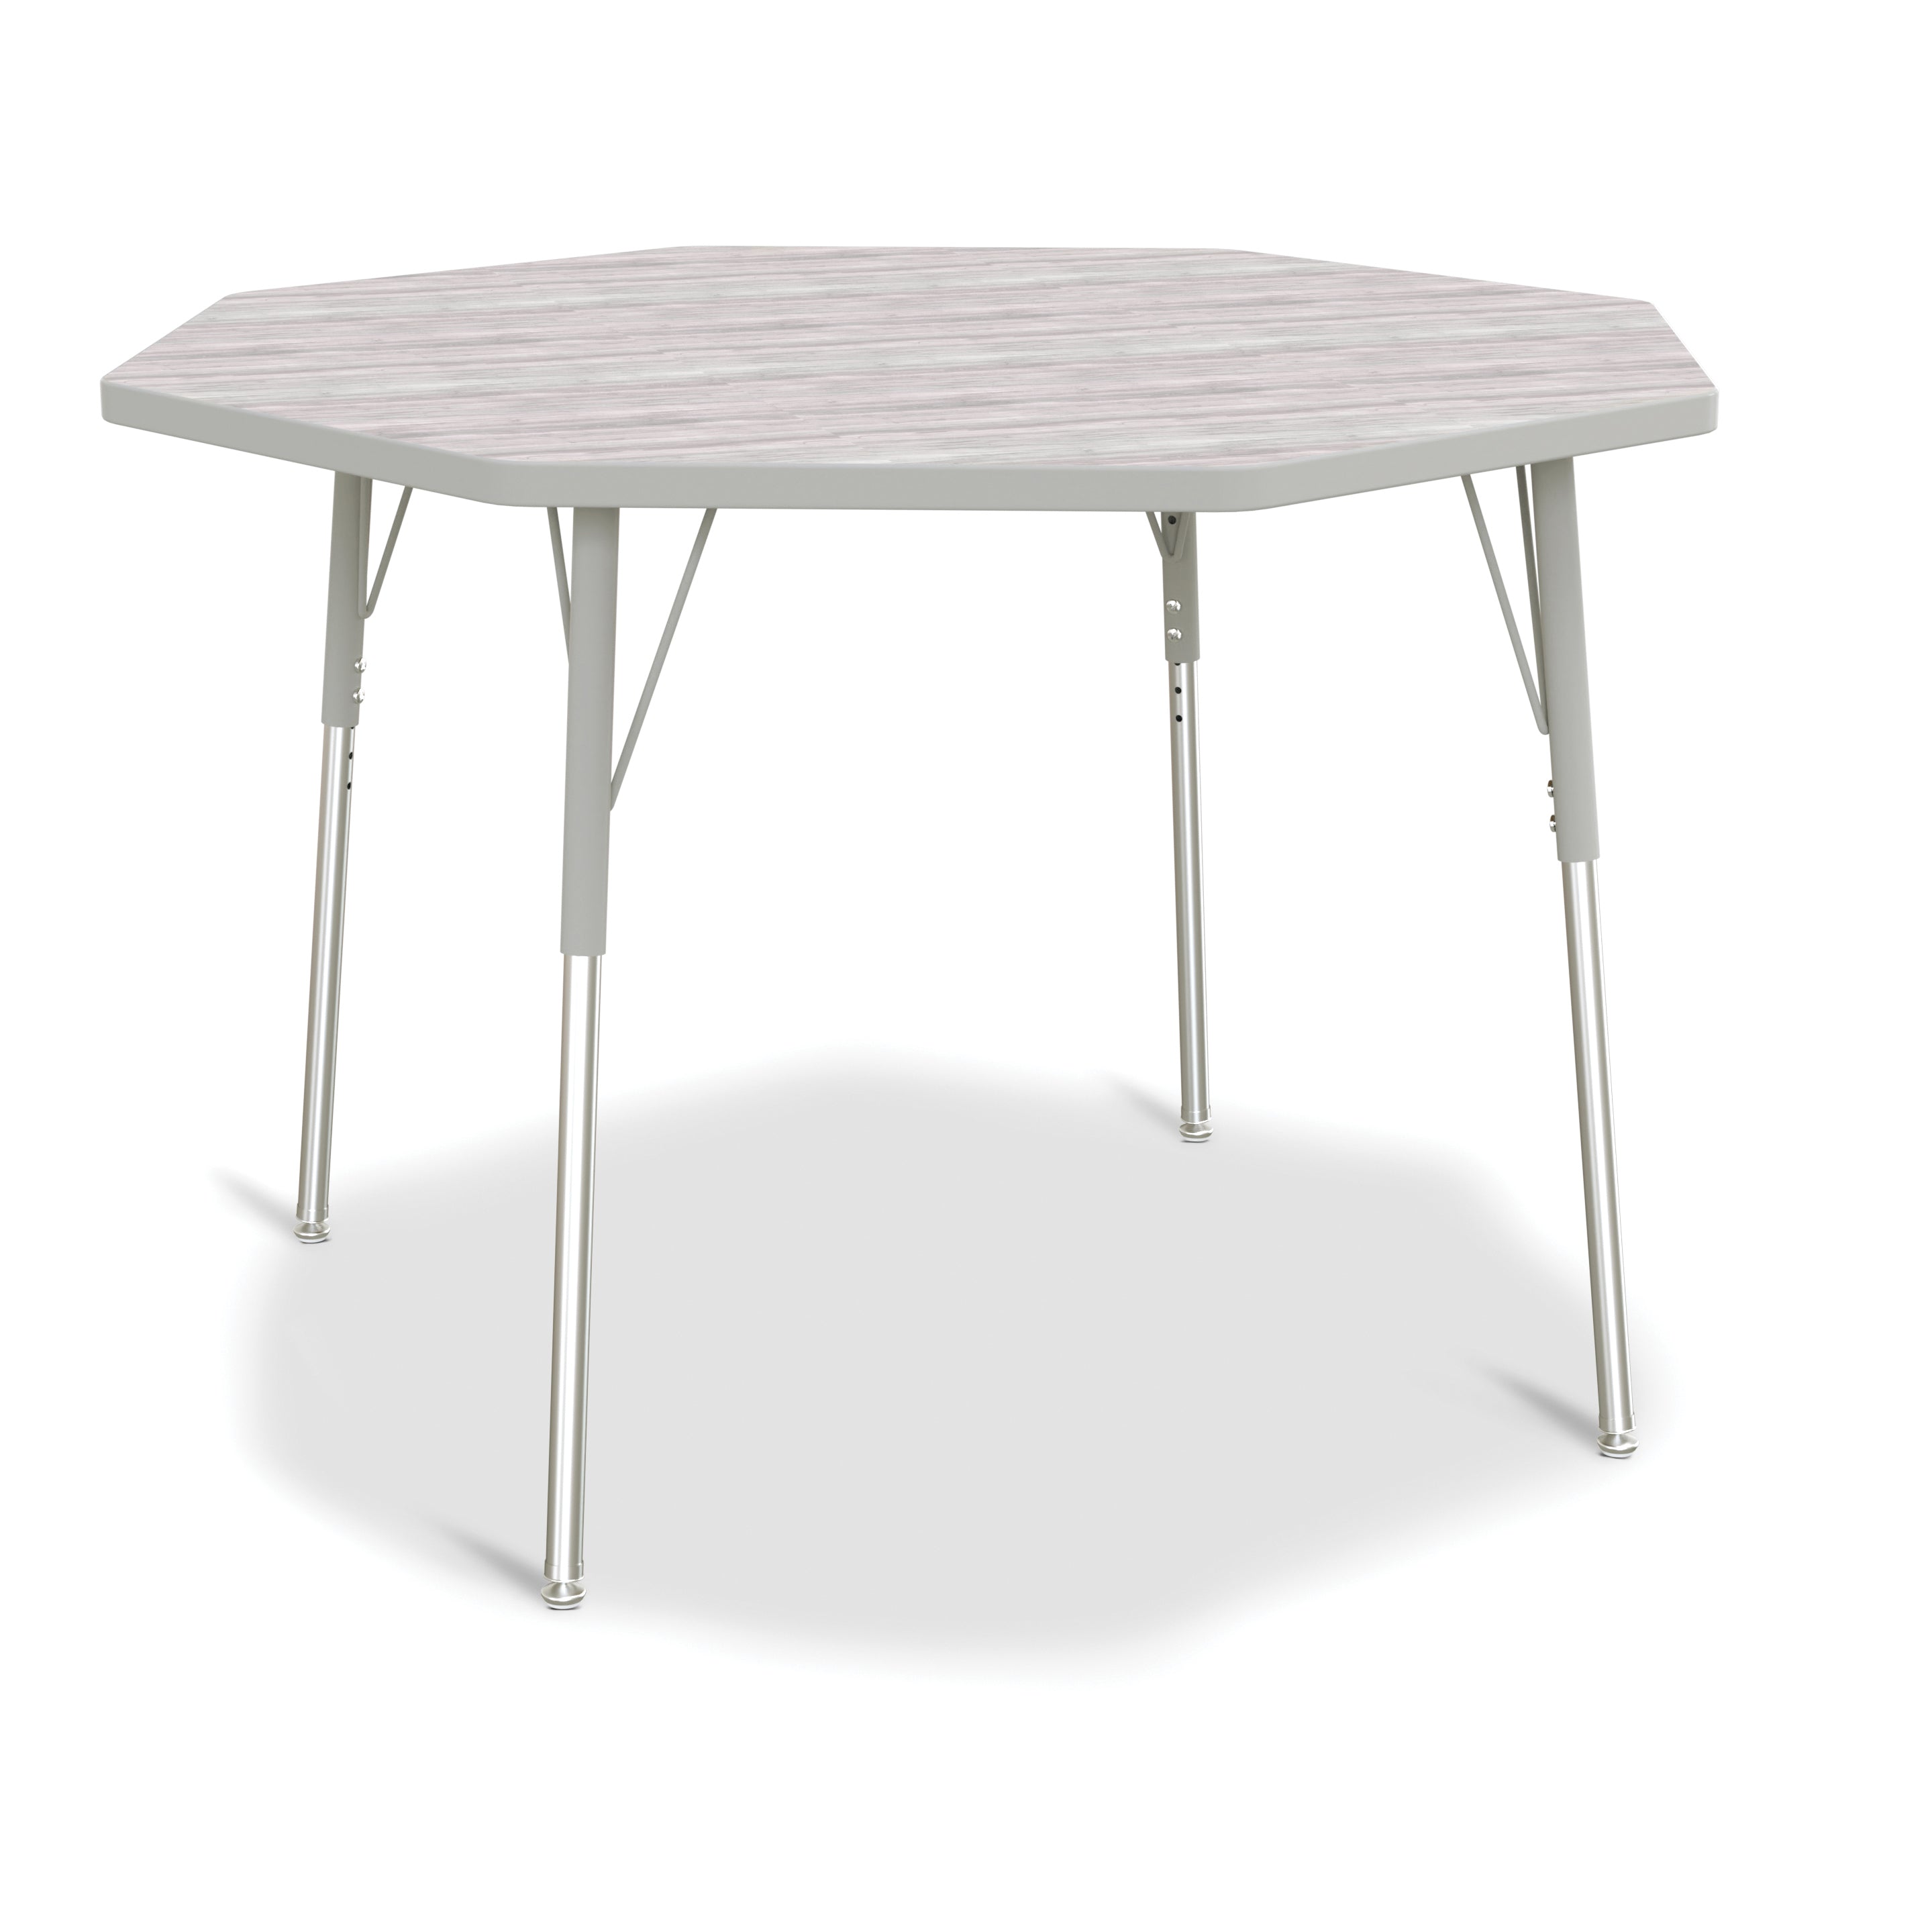 6428JCA450, Berries Octagon Activity Table - 48" X 48", A-height - Driftwood Gray/Gray/Gray